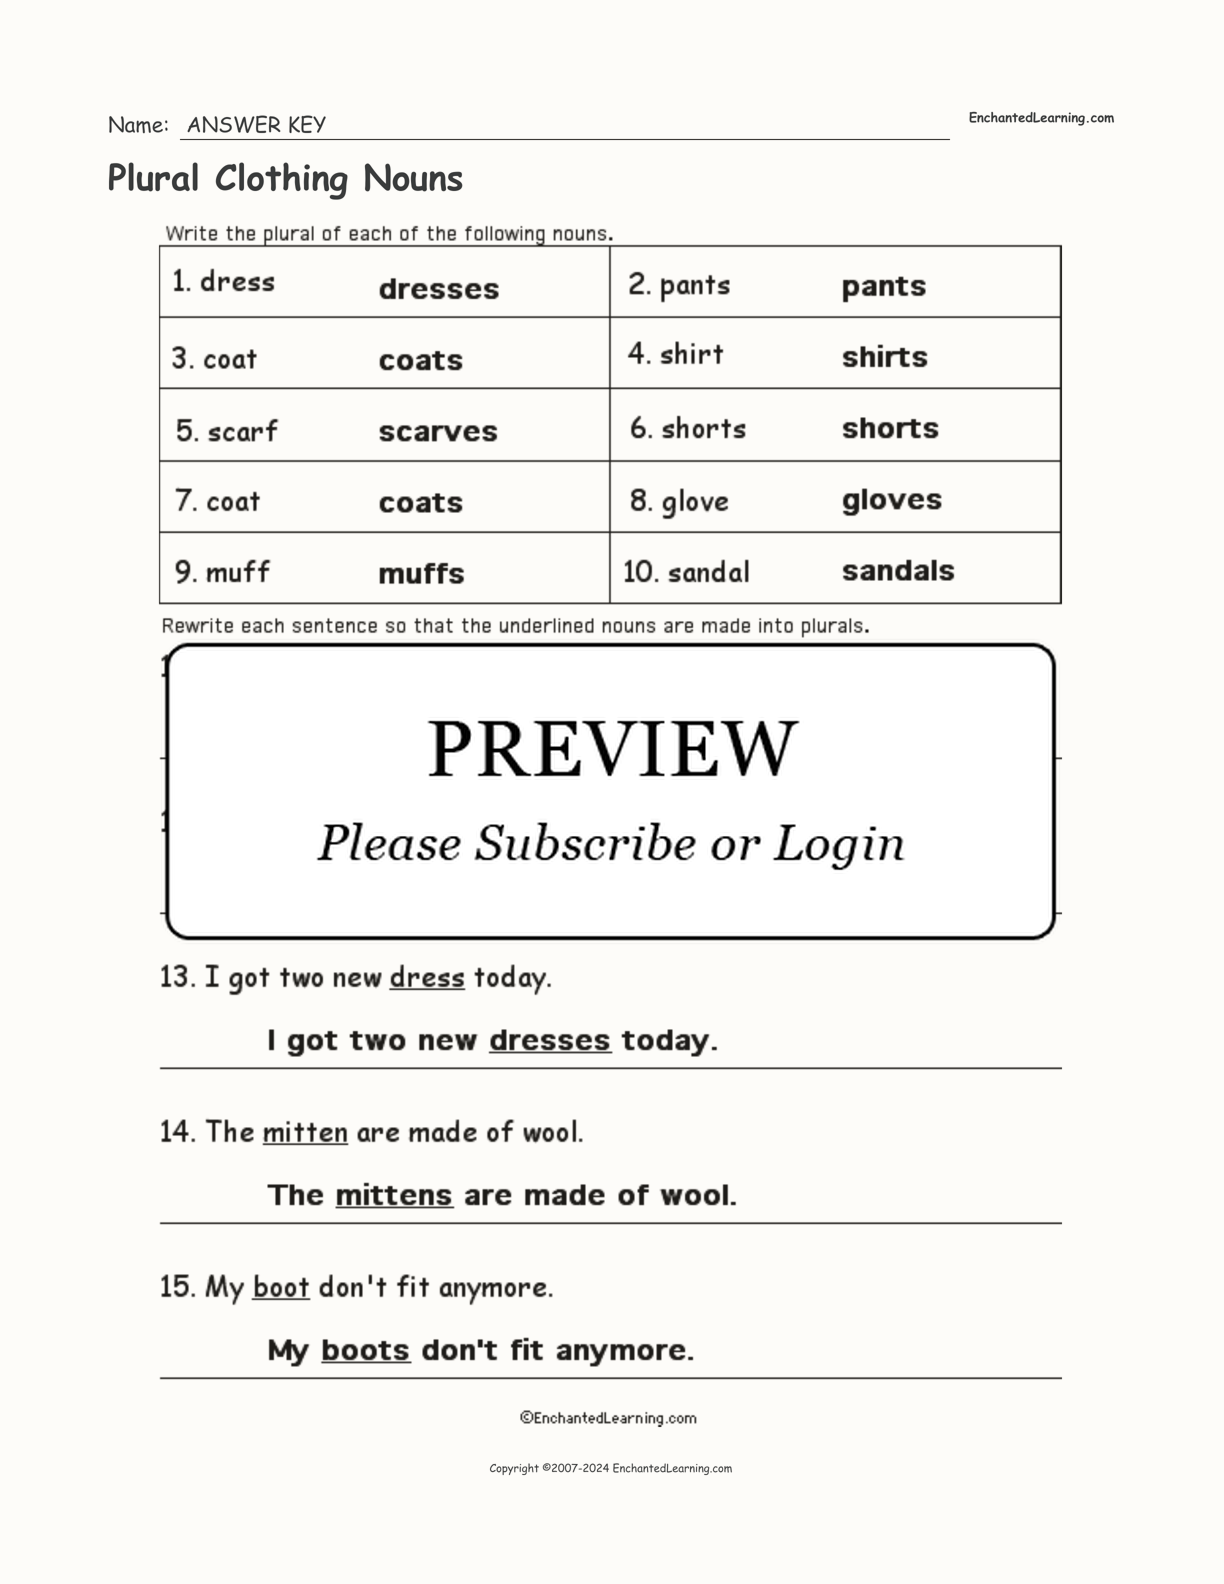 Plural Clothing Nouns interactive worksheet page 2